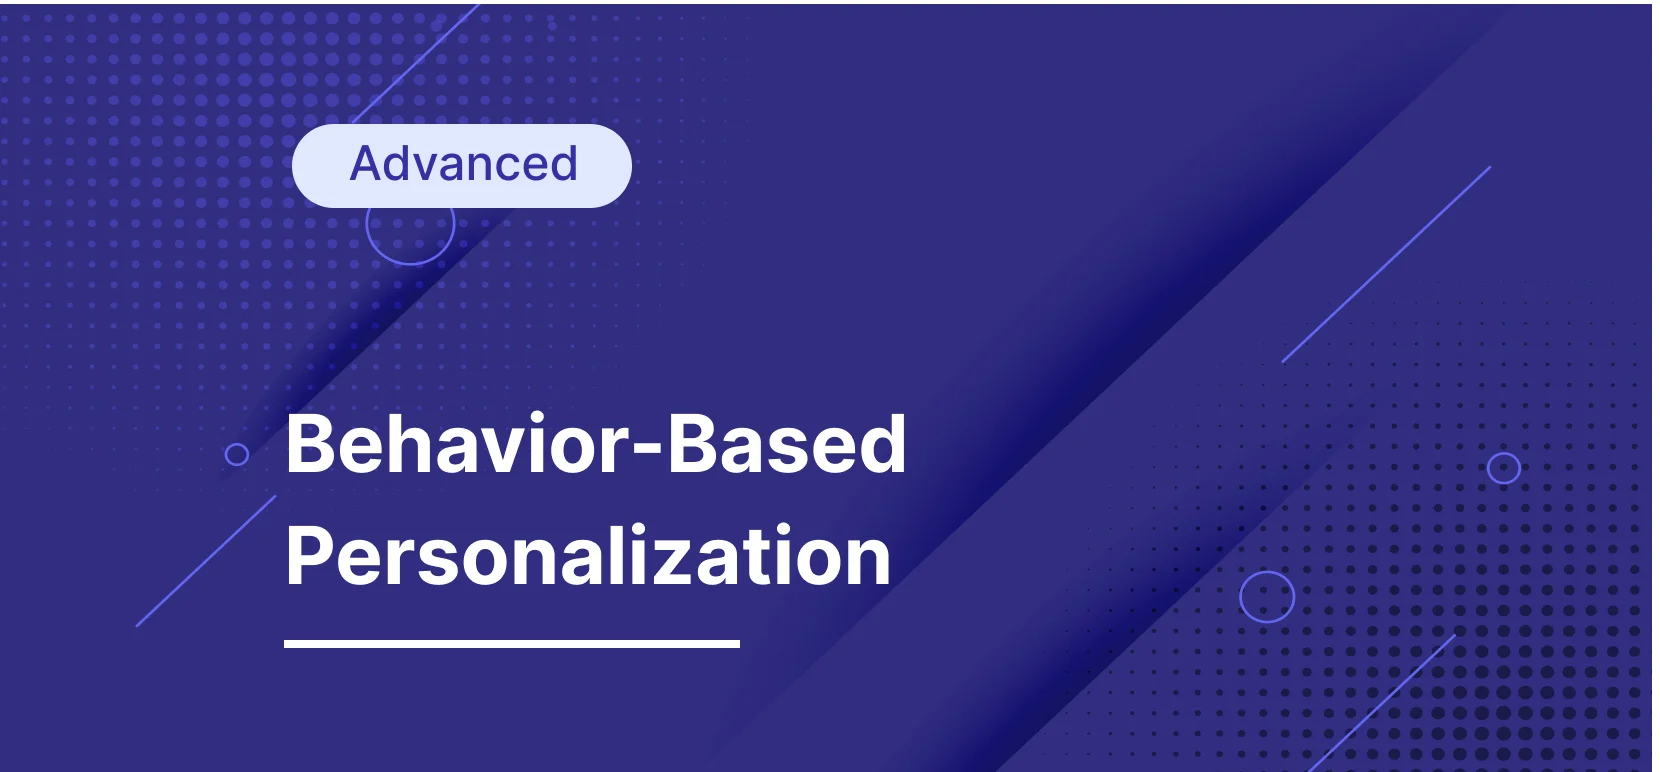 Getting Started to Behavioral Personalization to Better Tailor Experiences